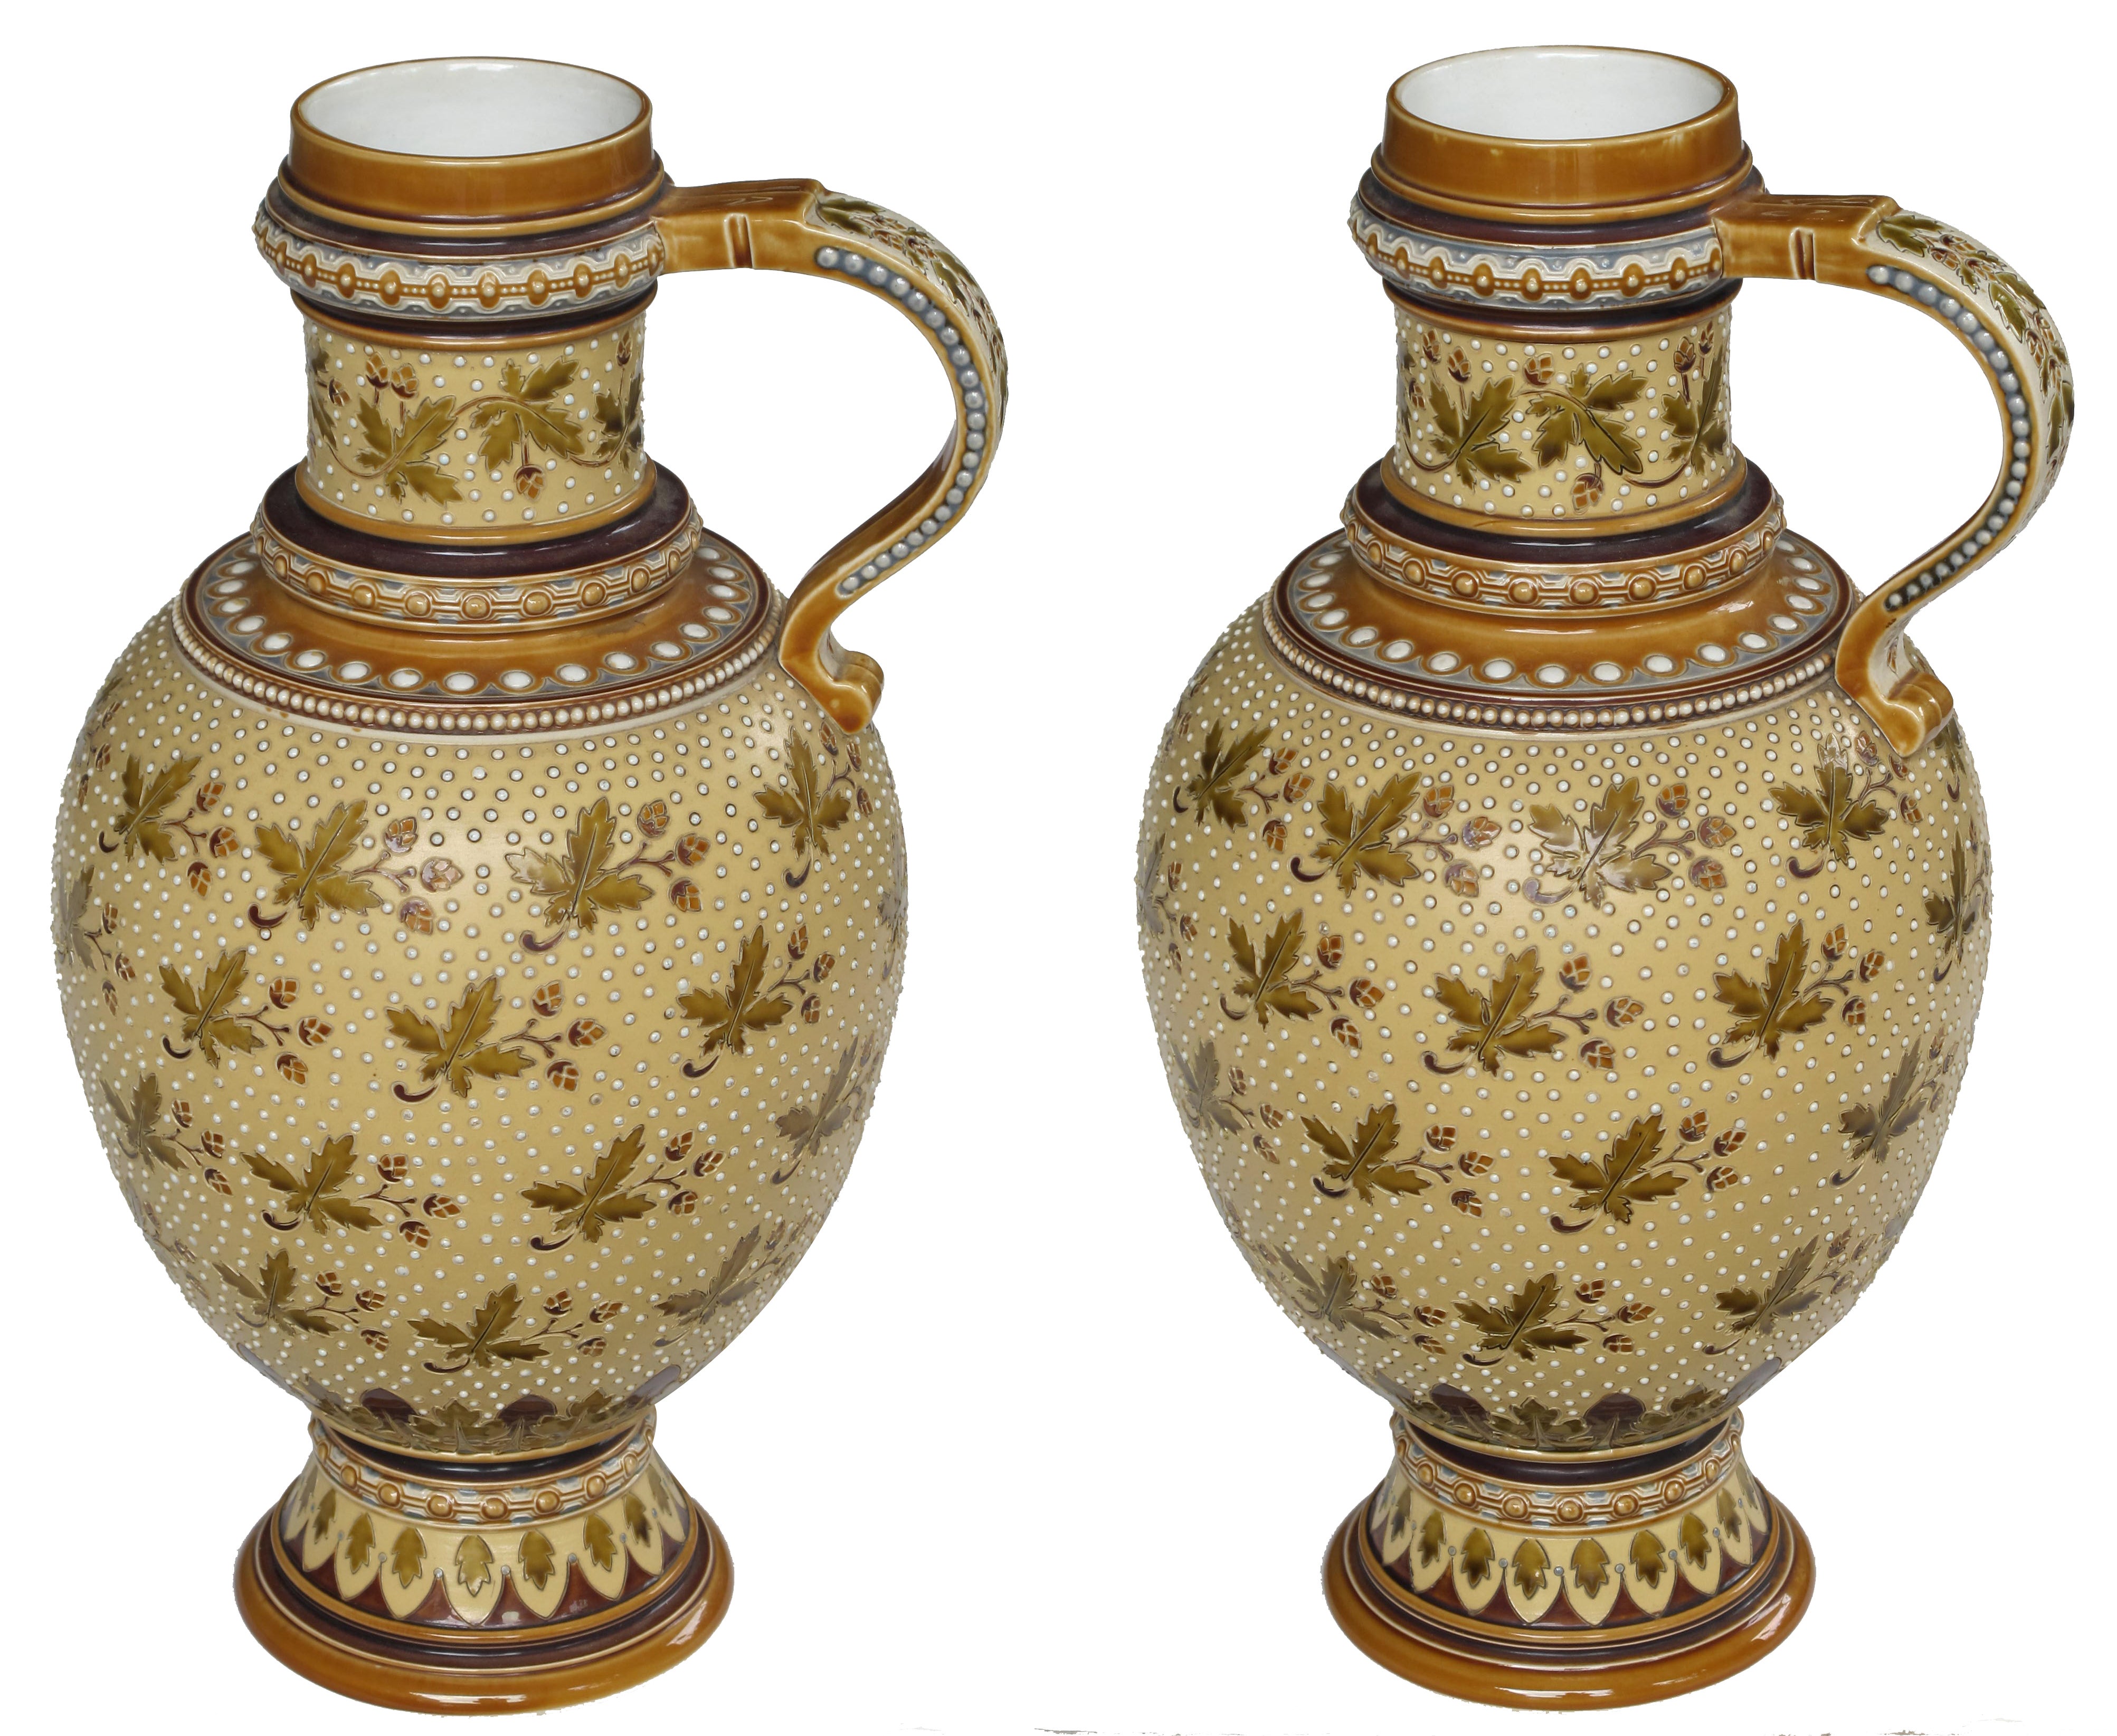 Good Quality Pair of German Mettlach Pottery Ewers with Impressed Maker's Mark